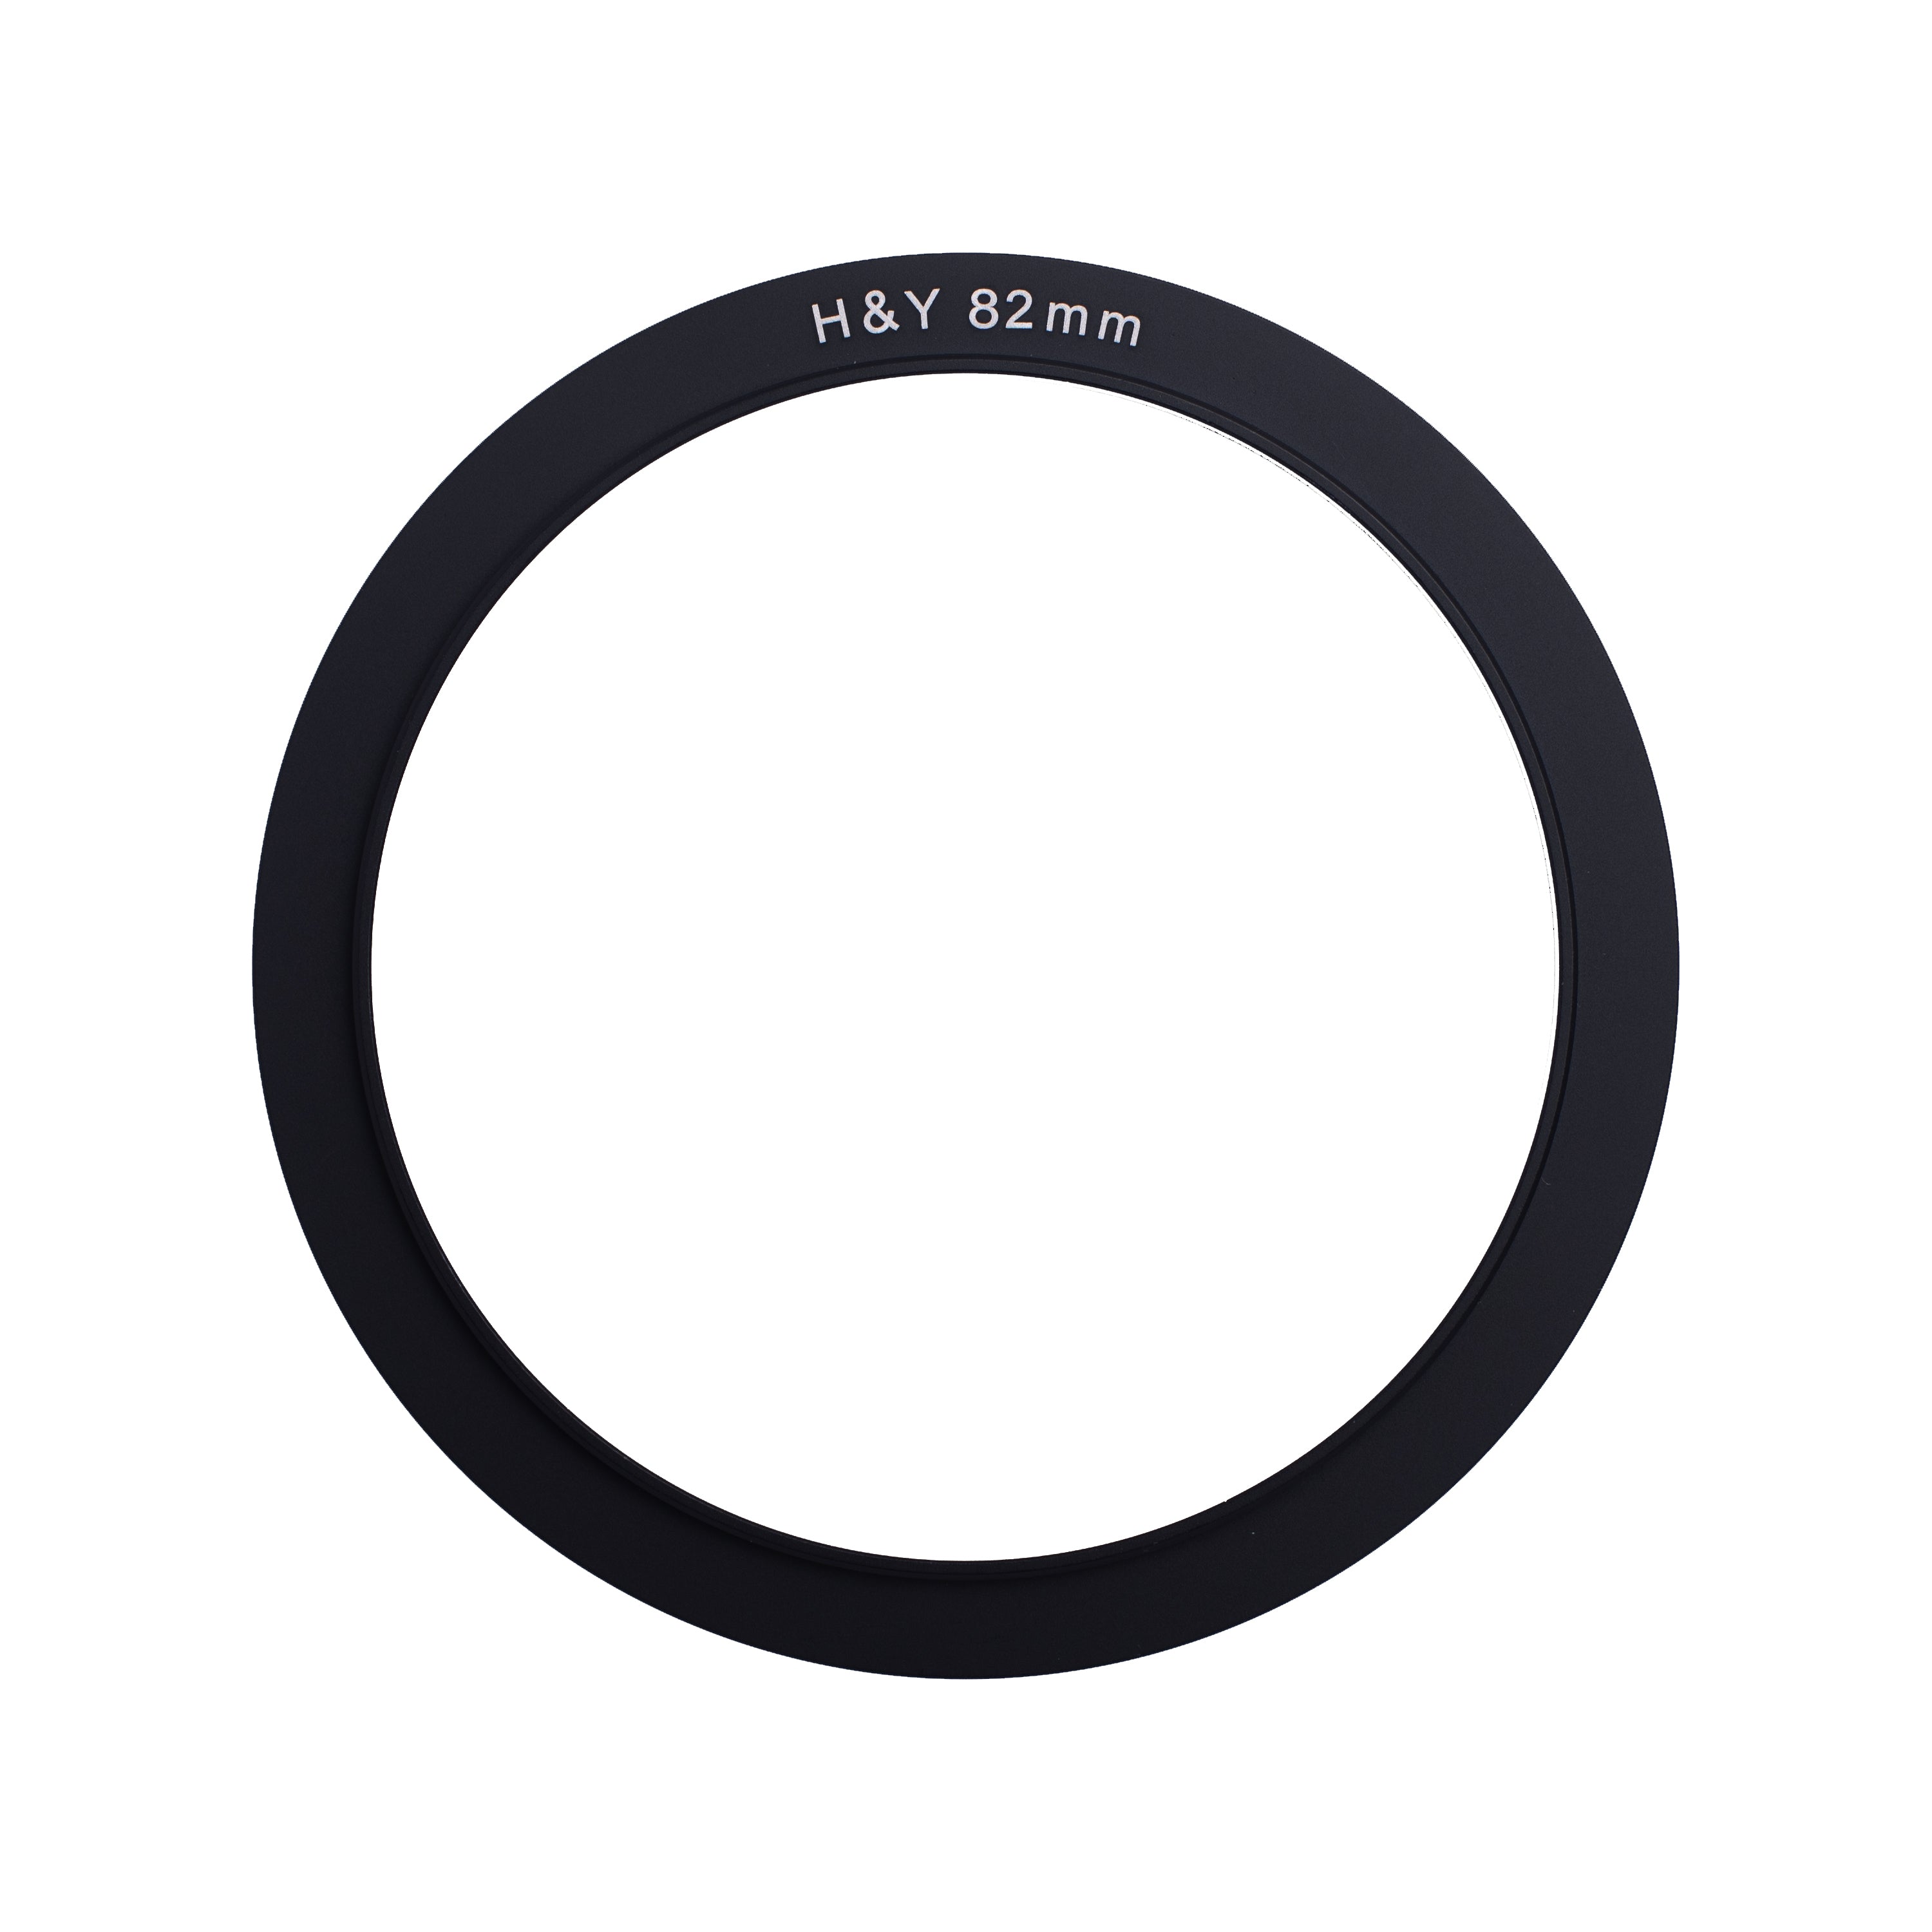 H&Y K- Series Adapter Ring (10 Sizes / 49-86mm)